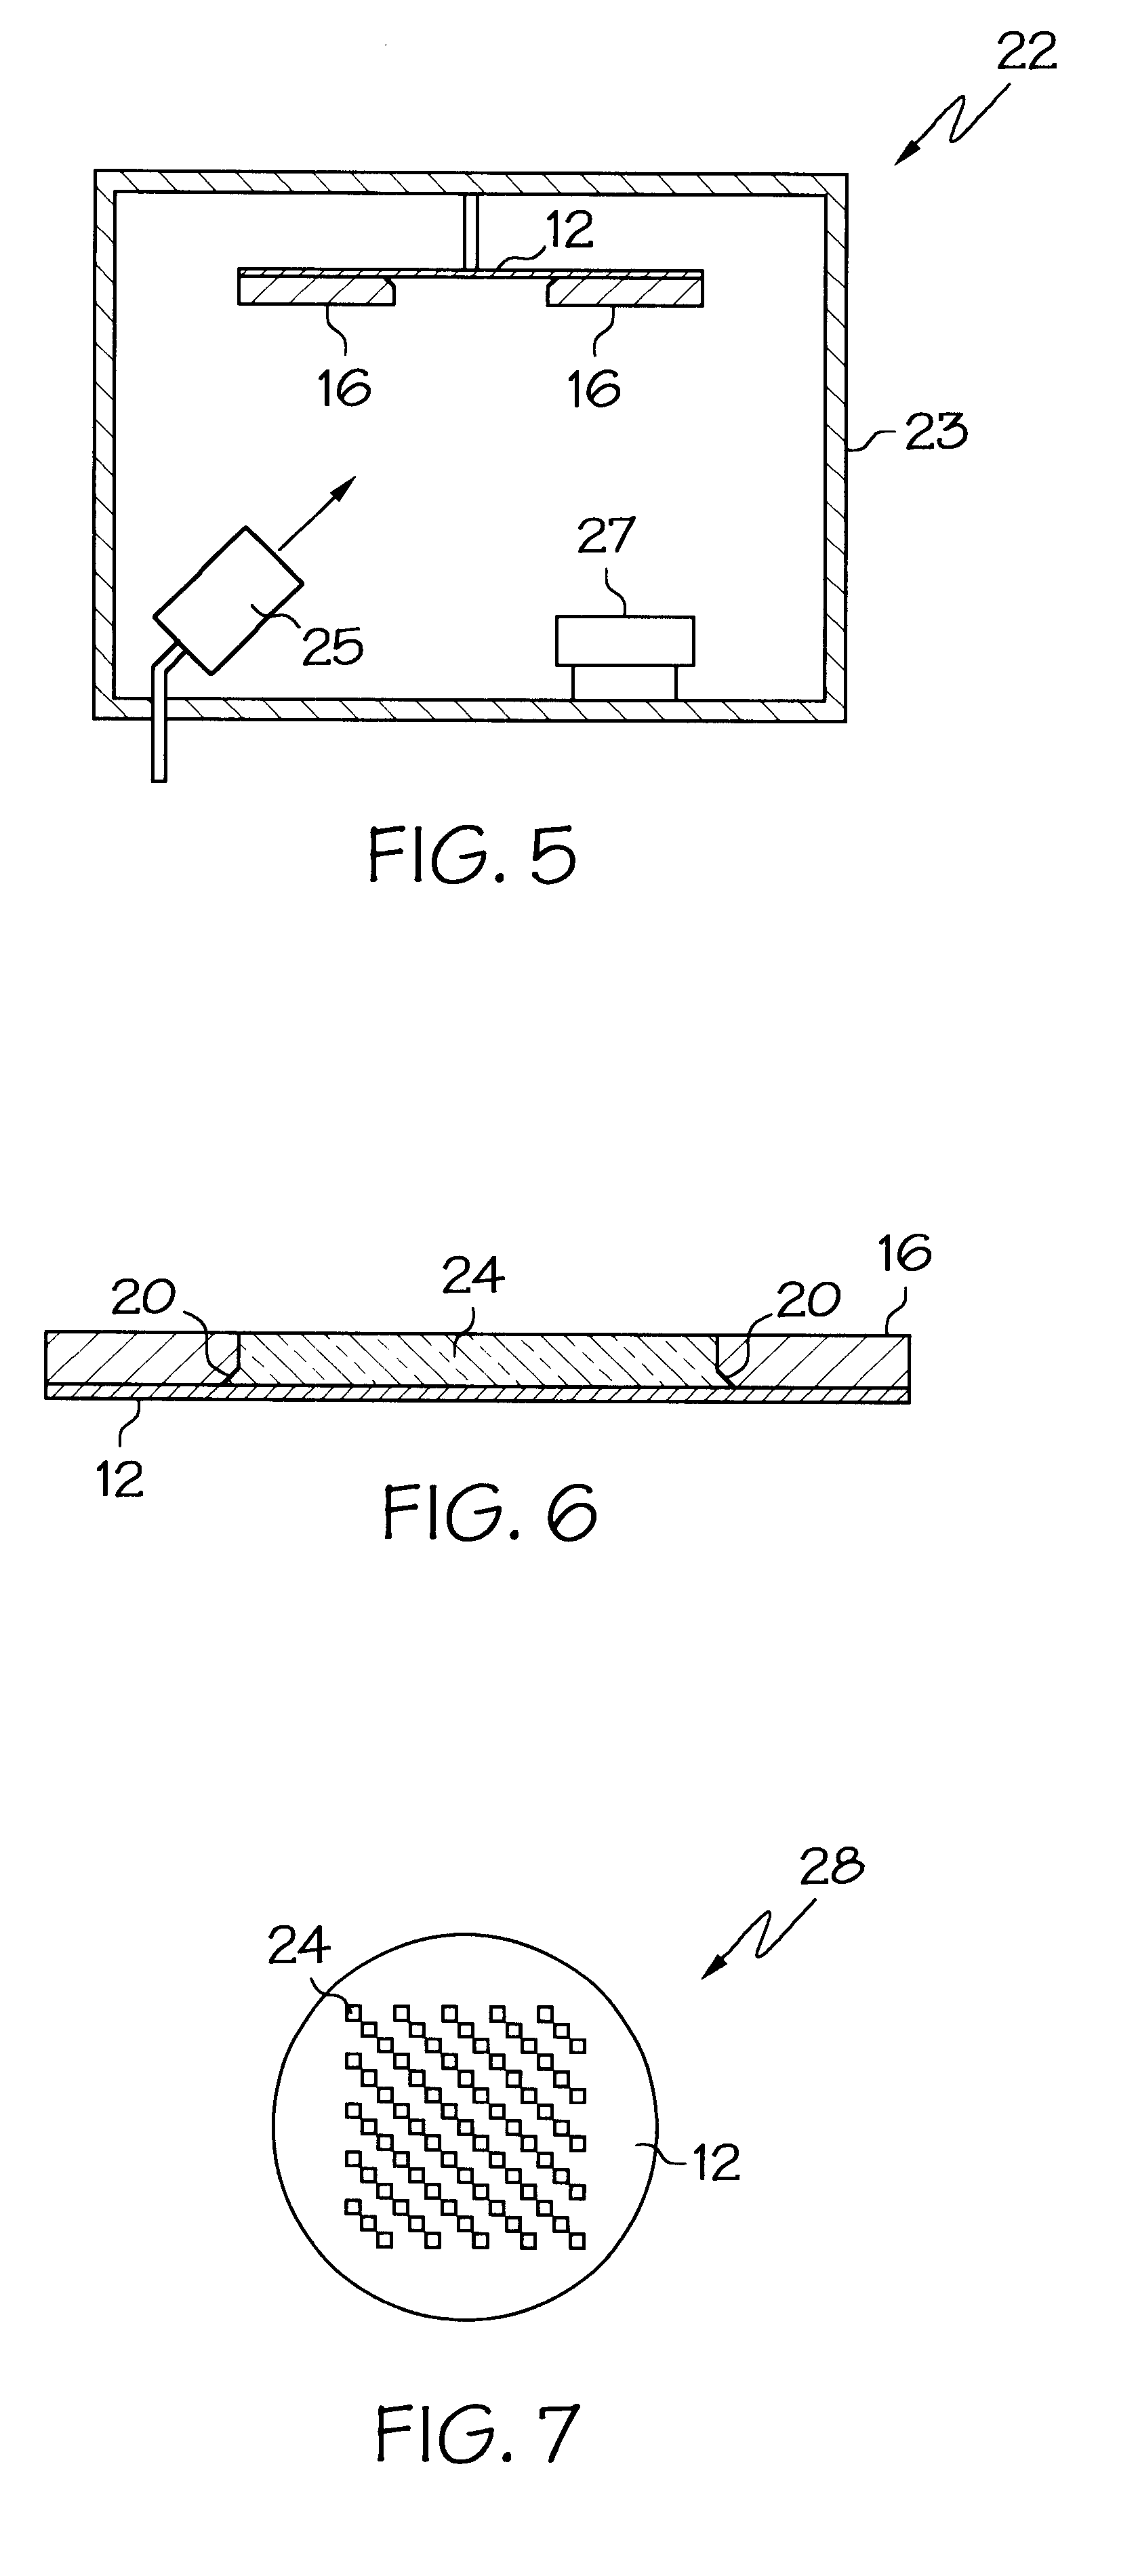 Method for making monolithic patterned dichroic filter detector arrays for spectroscopic imaging